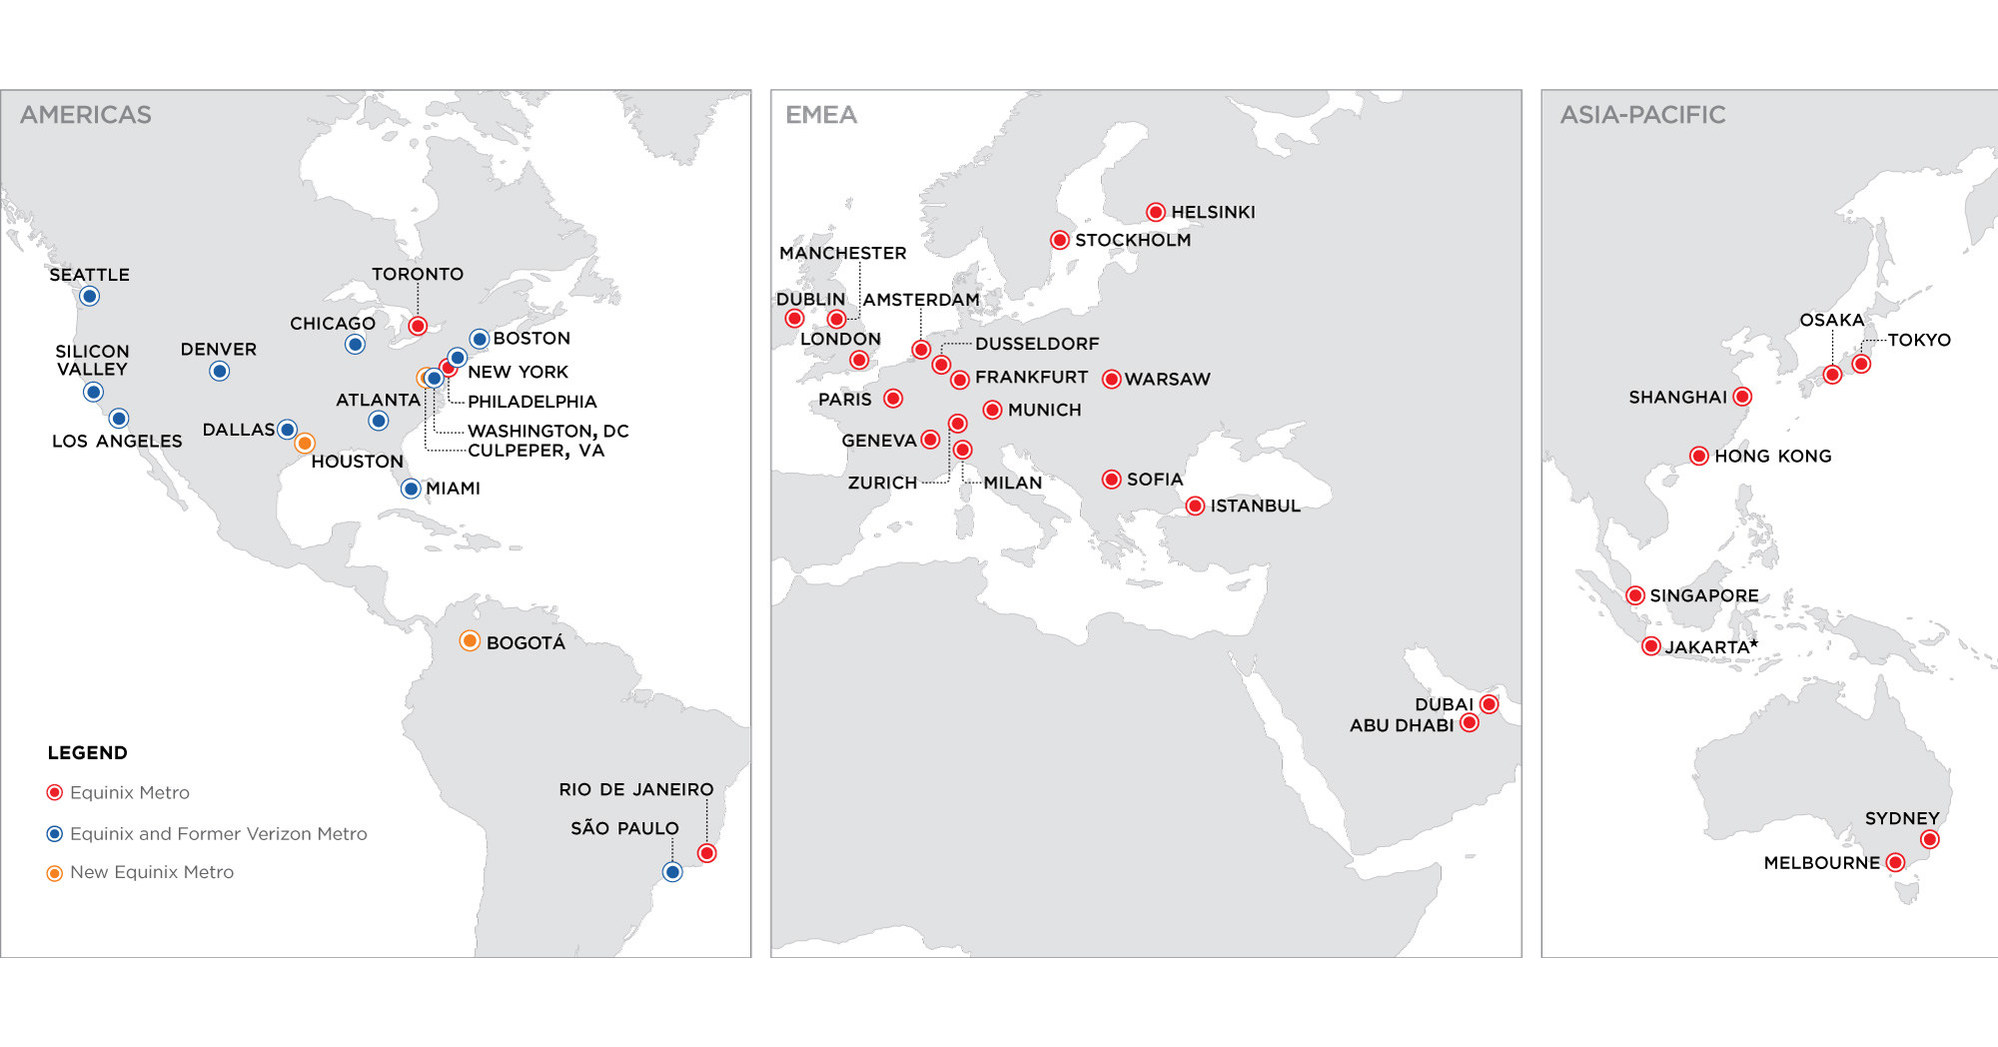 Equinix Completes Acquisition of 29 Data Centers from Verizon1998 x 1047